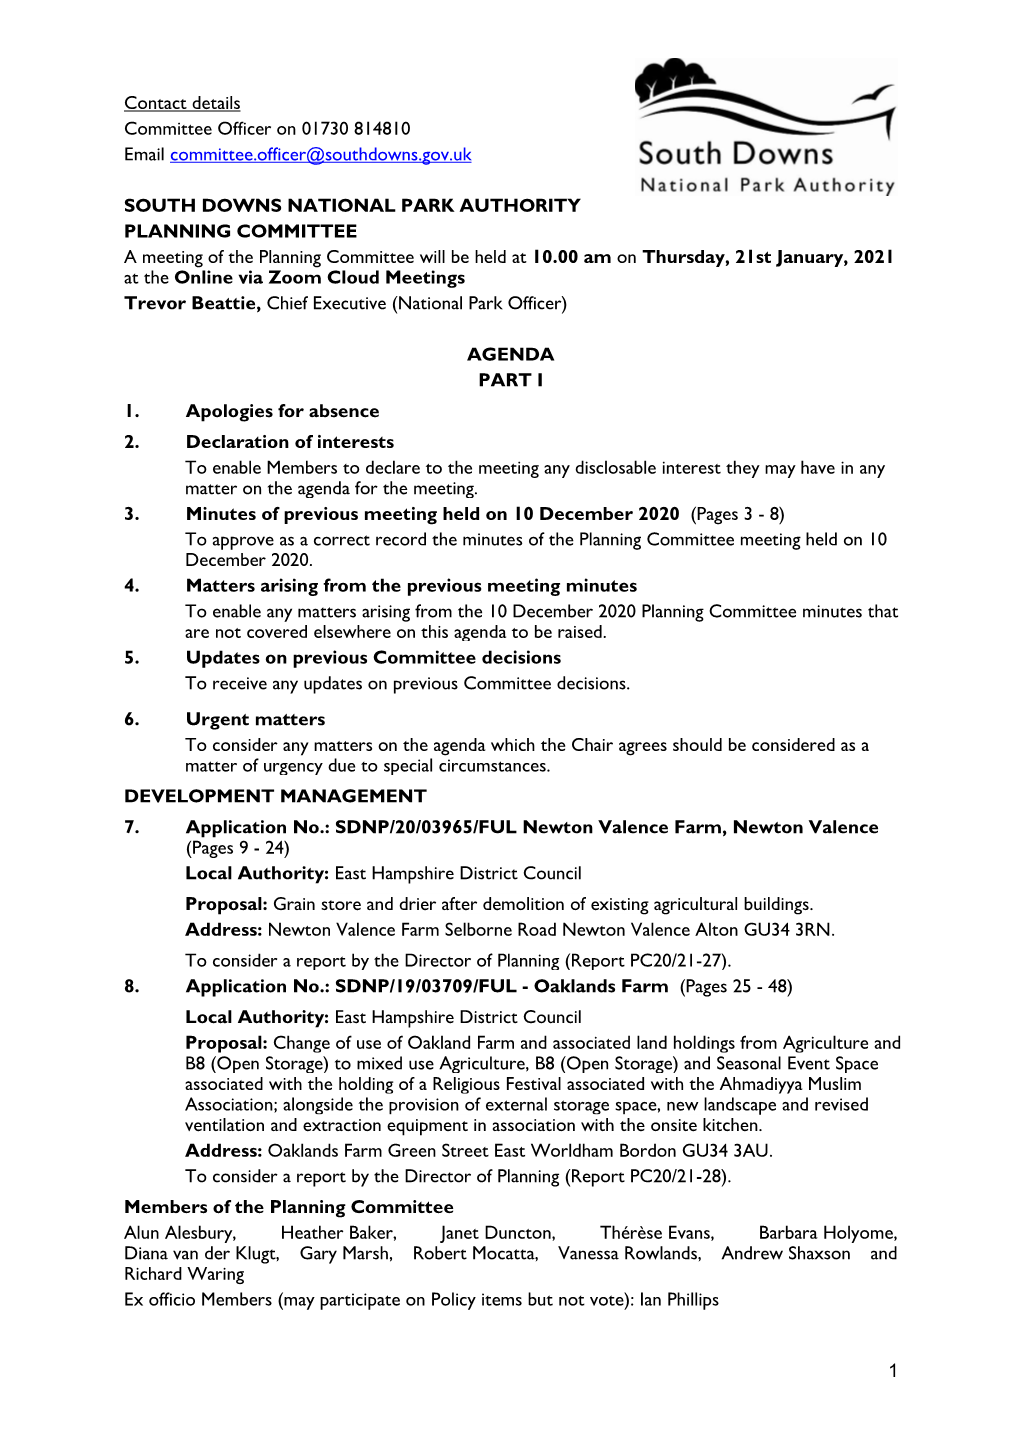 Agenda Document for Planning Committee, 21/01/2021 10:00